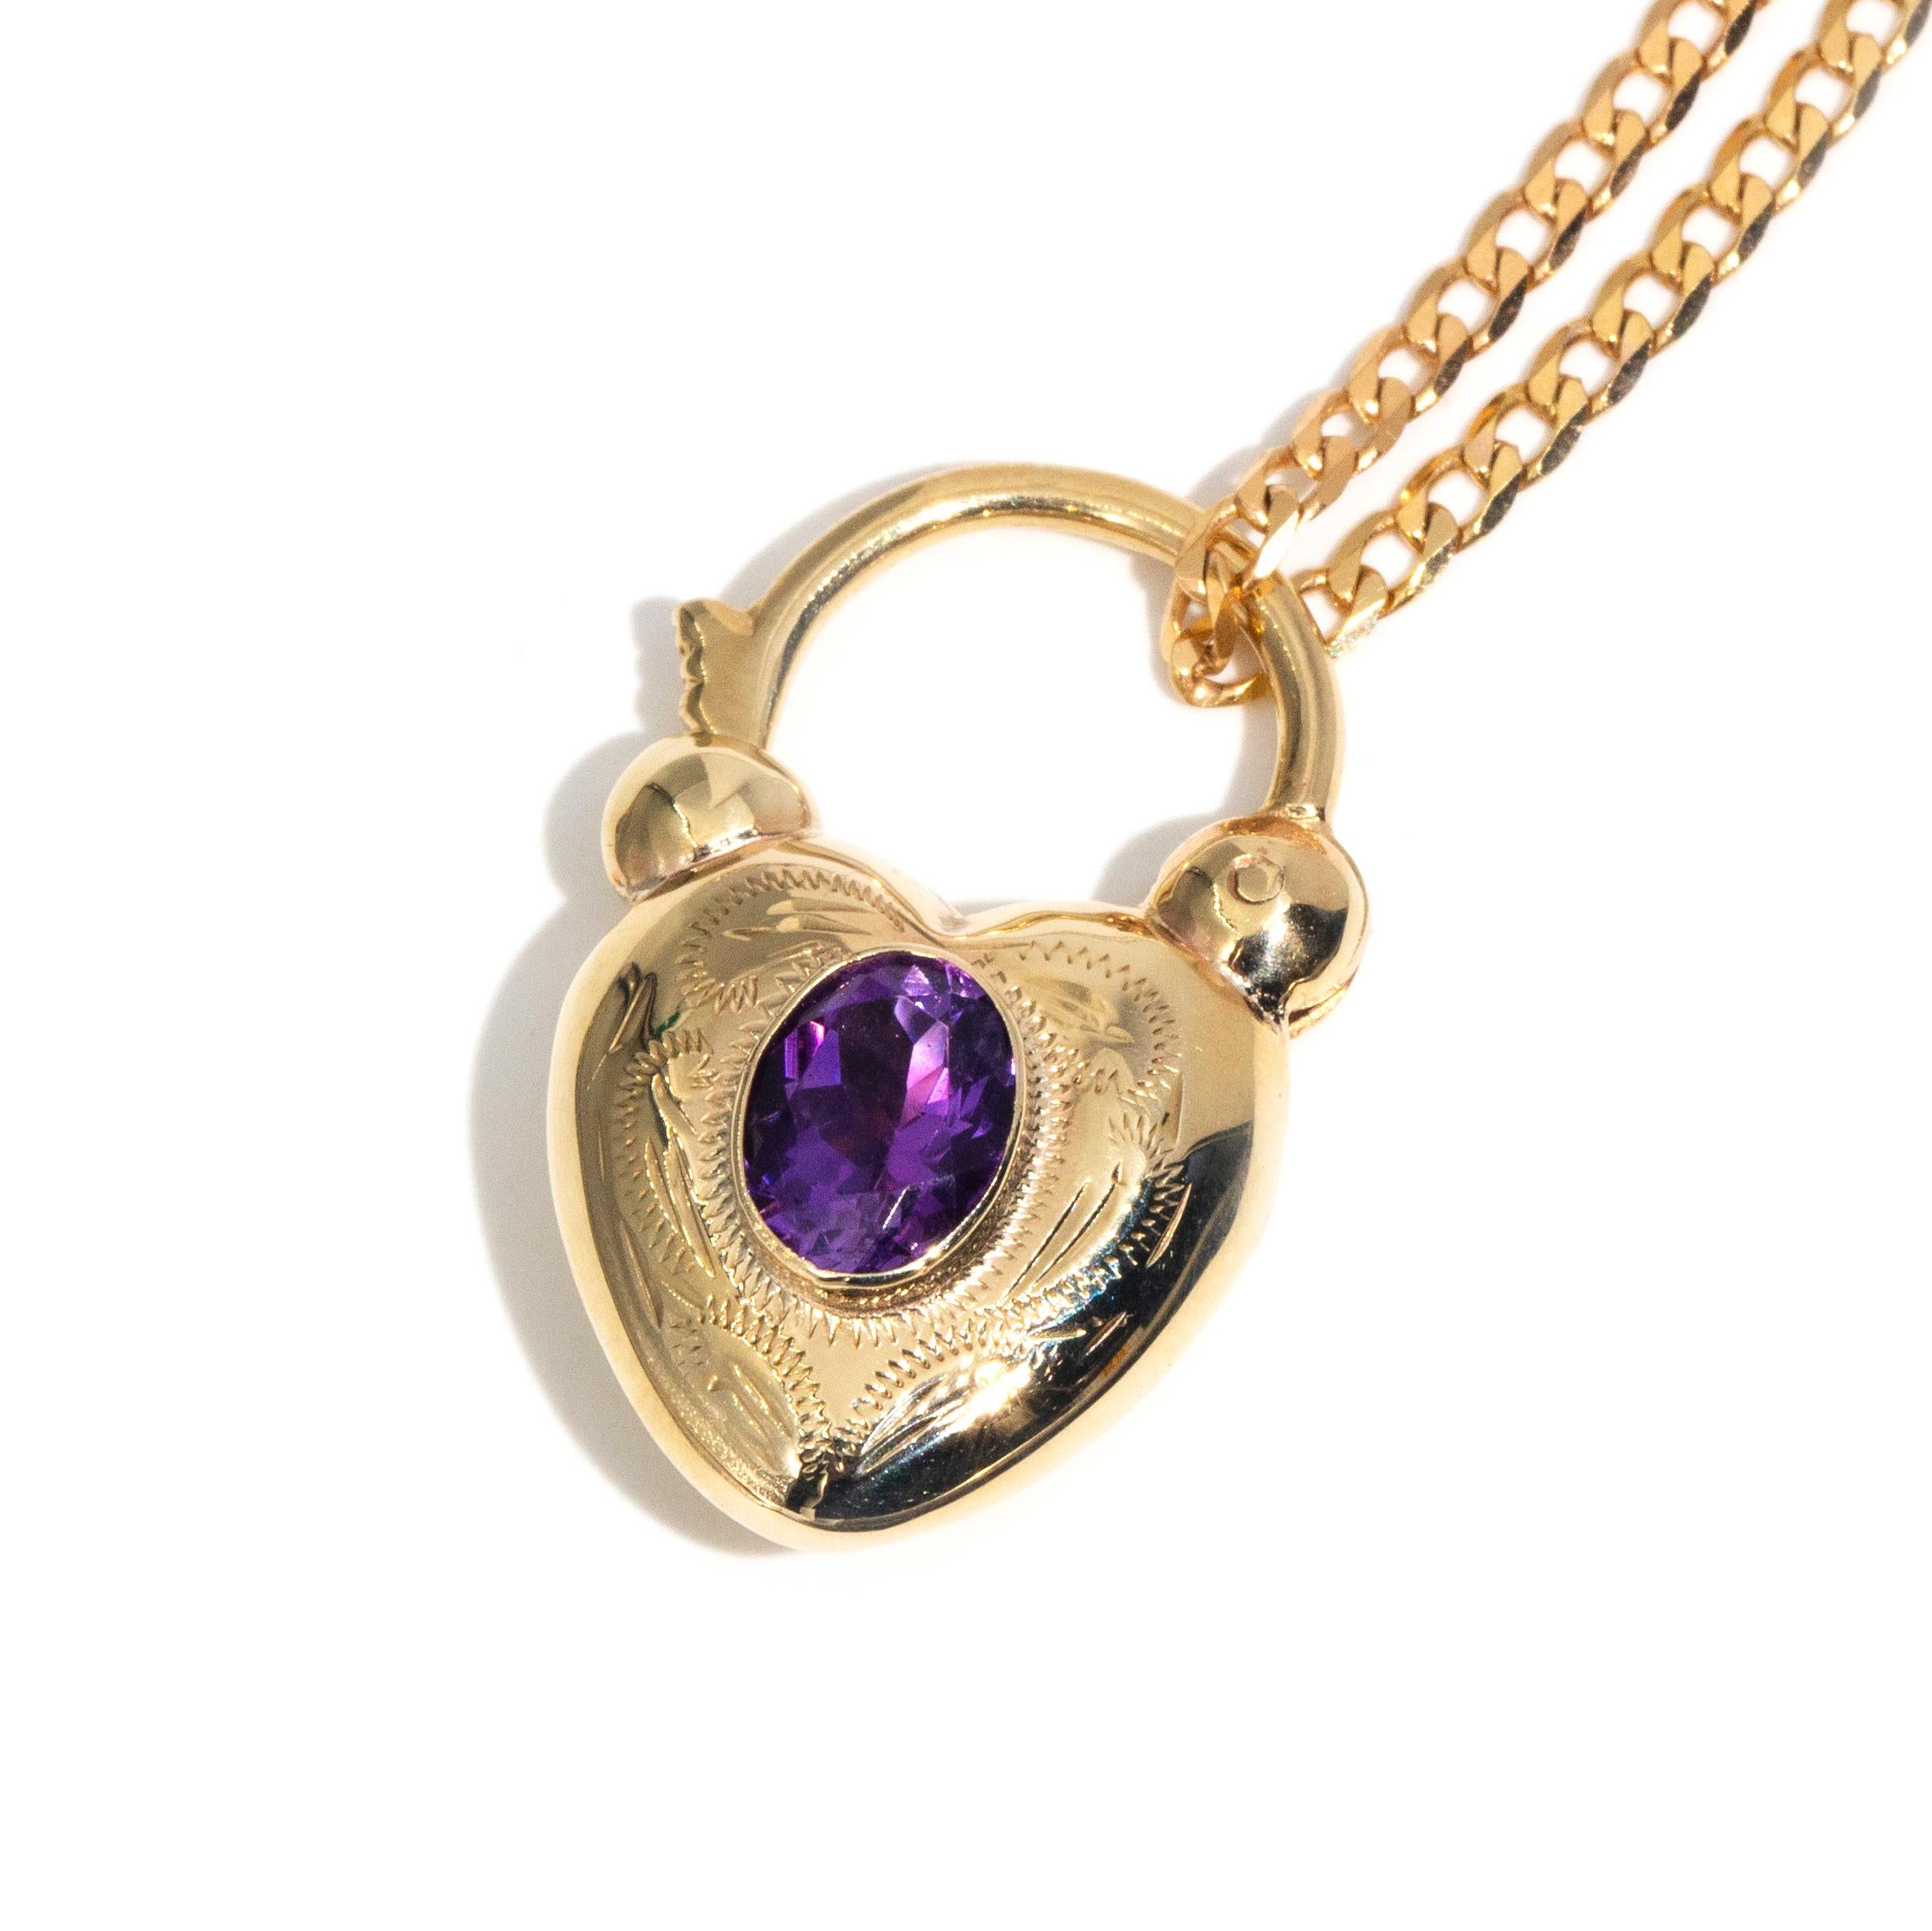 Modern Vintage Circa 1970s Amethyst Heart Shaped Pendant & Chain 9 Carat Yellow Gold  For Sale